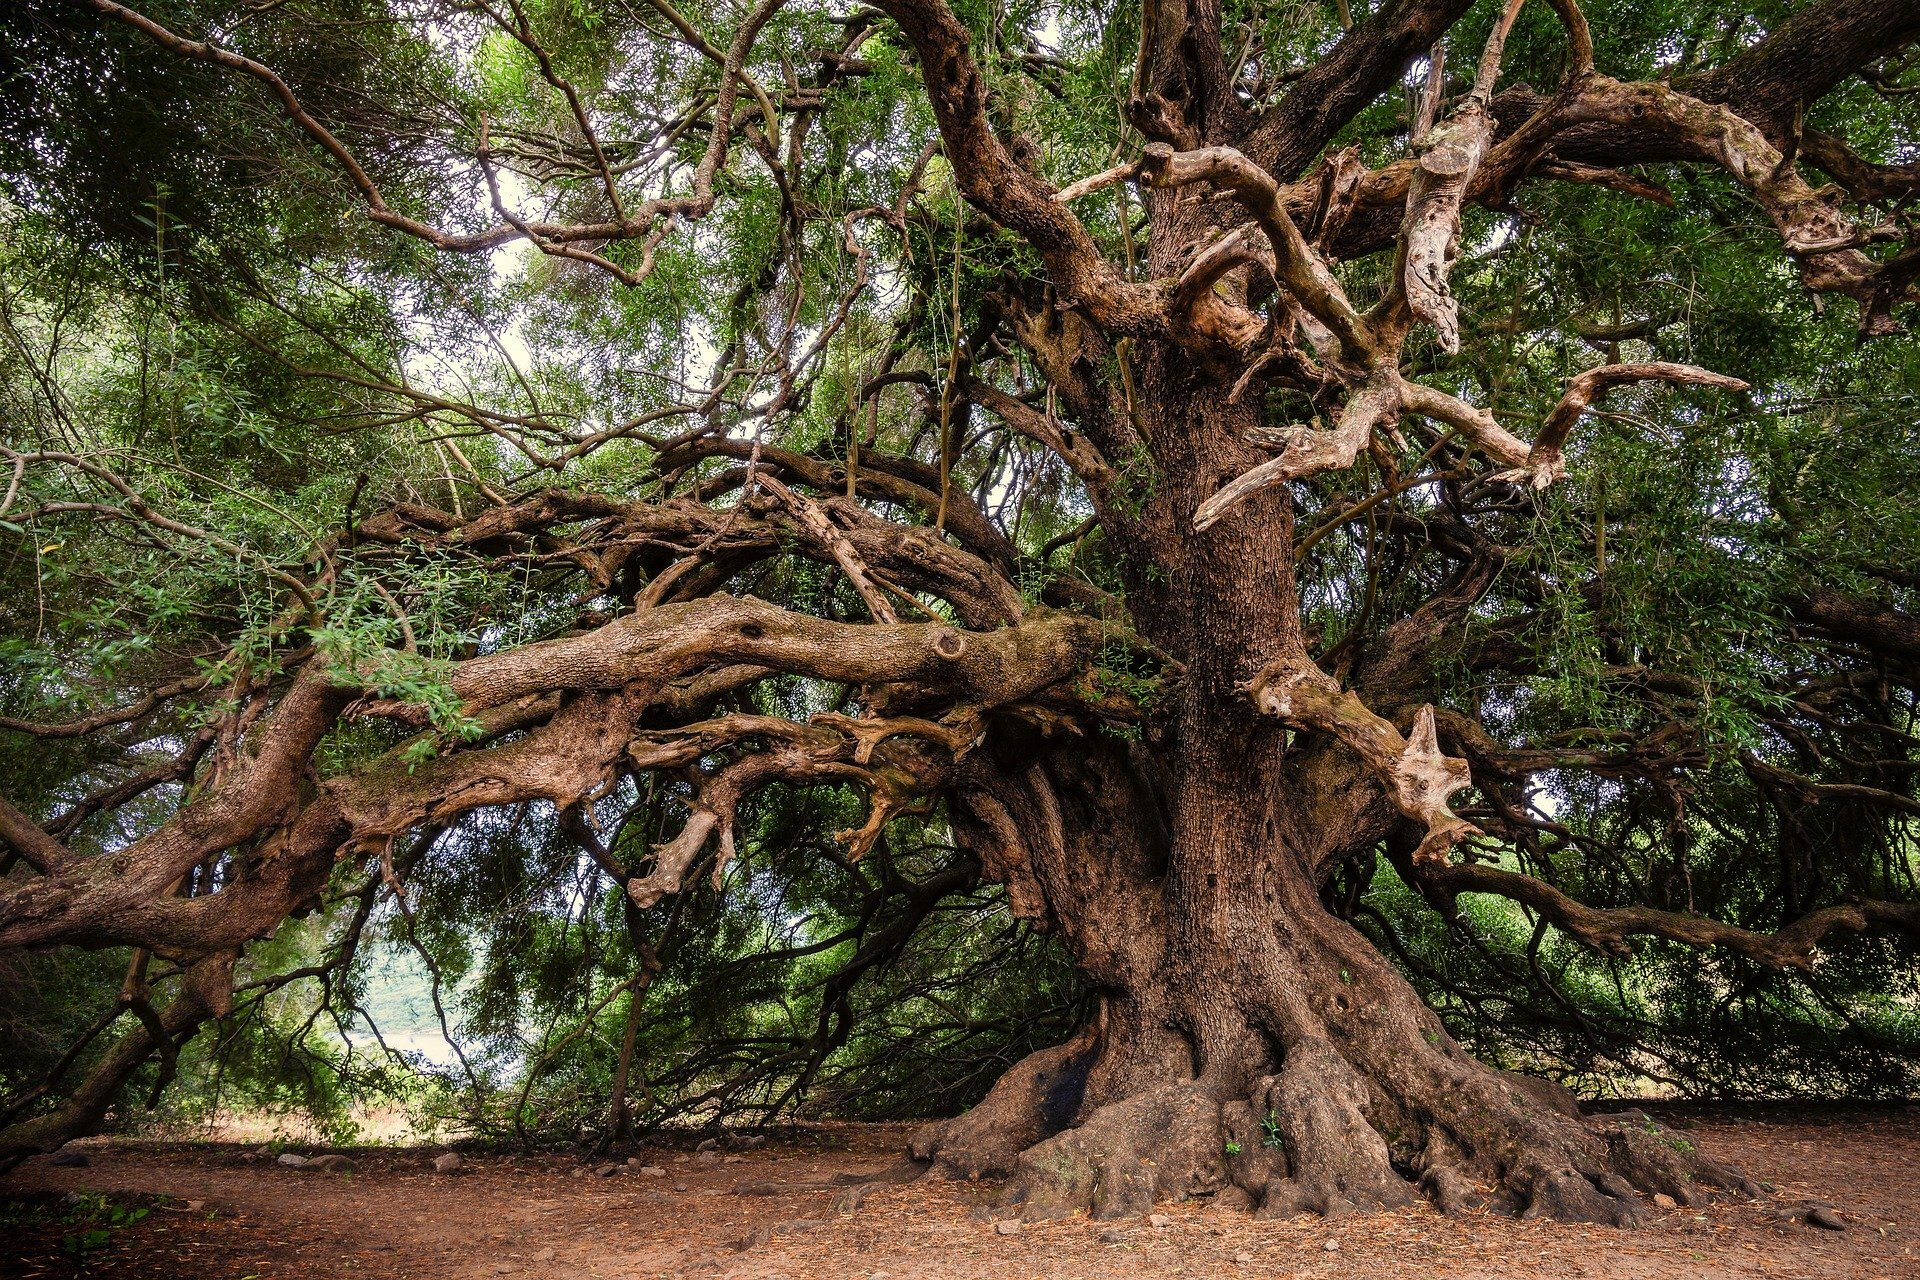 Despite debate, even the world's oldest trees are not immortal